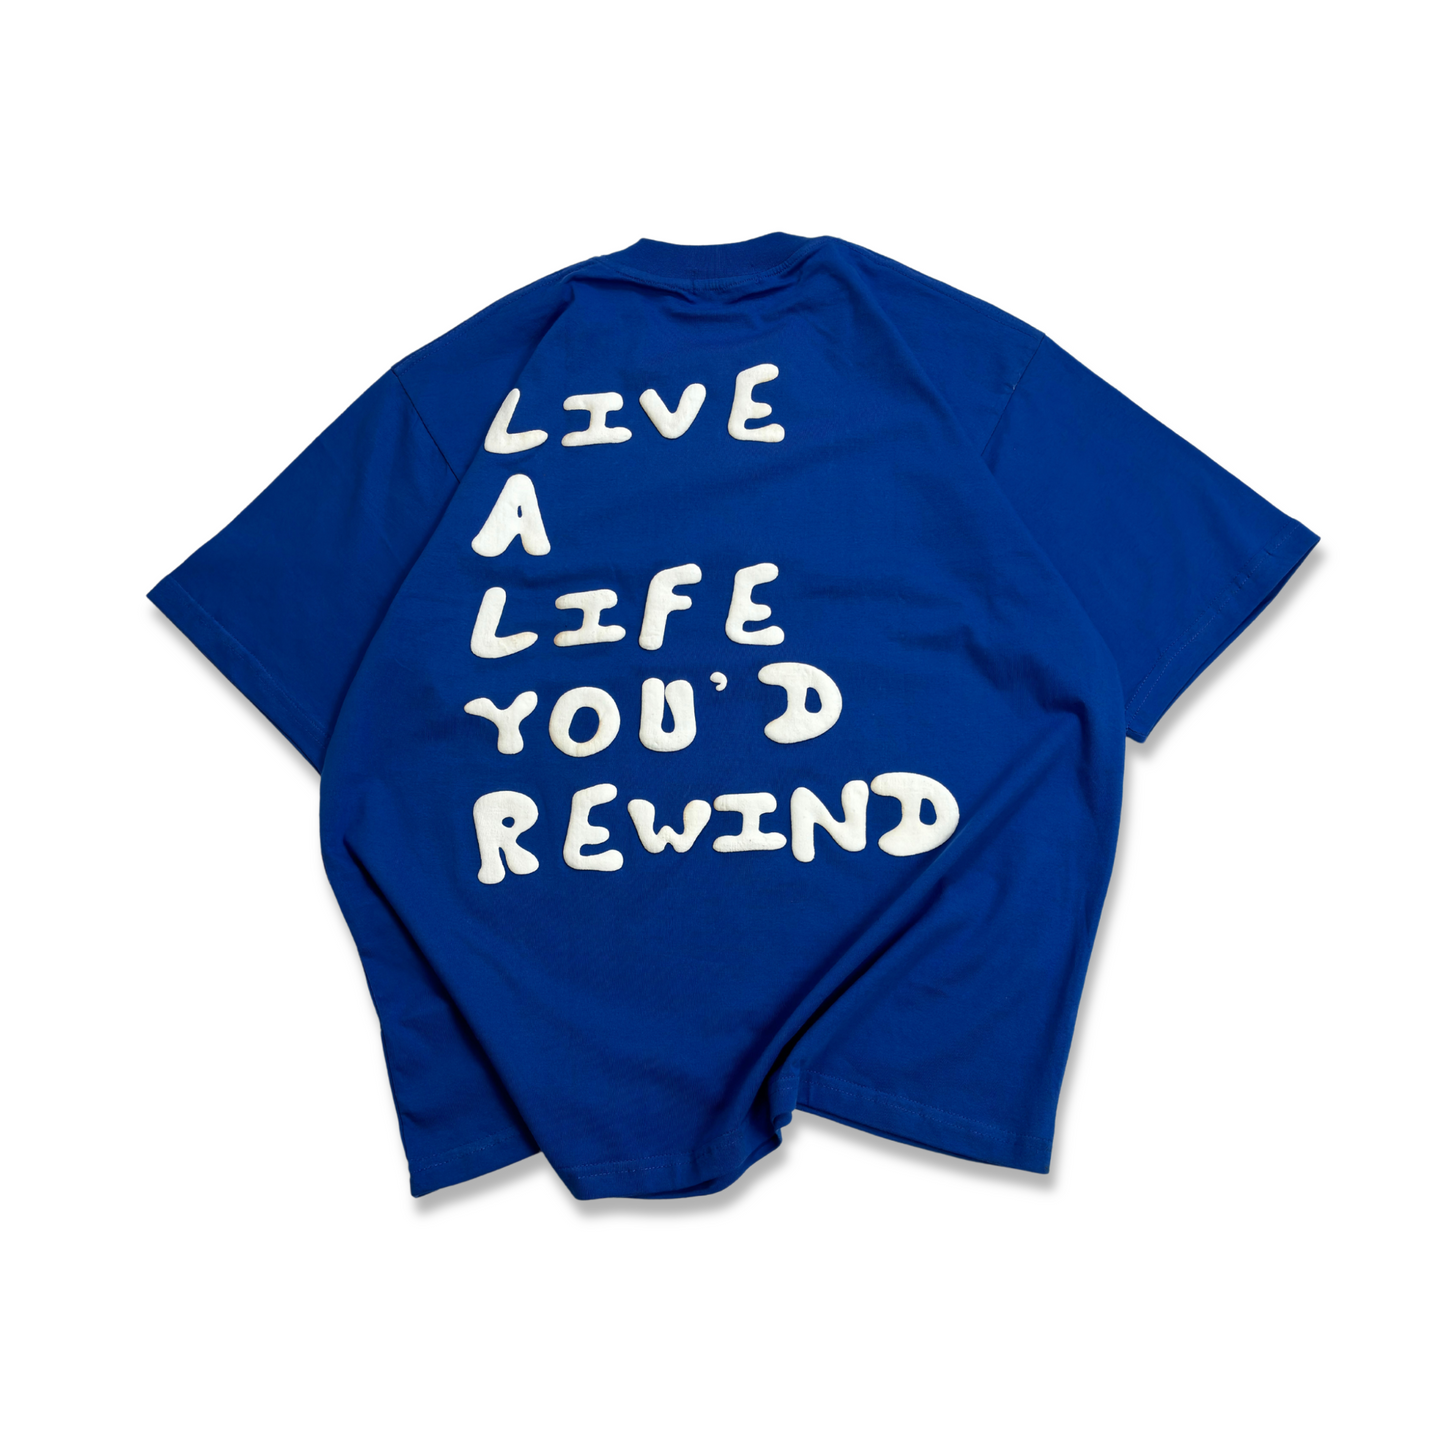 Rewind x Tees (Collection)